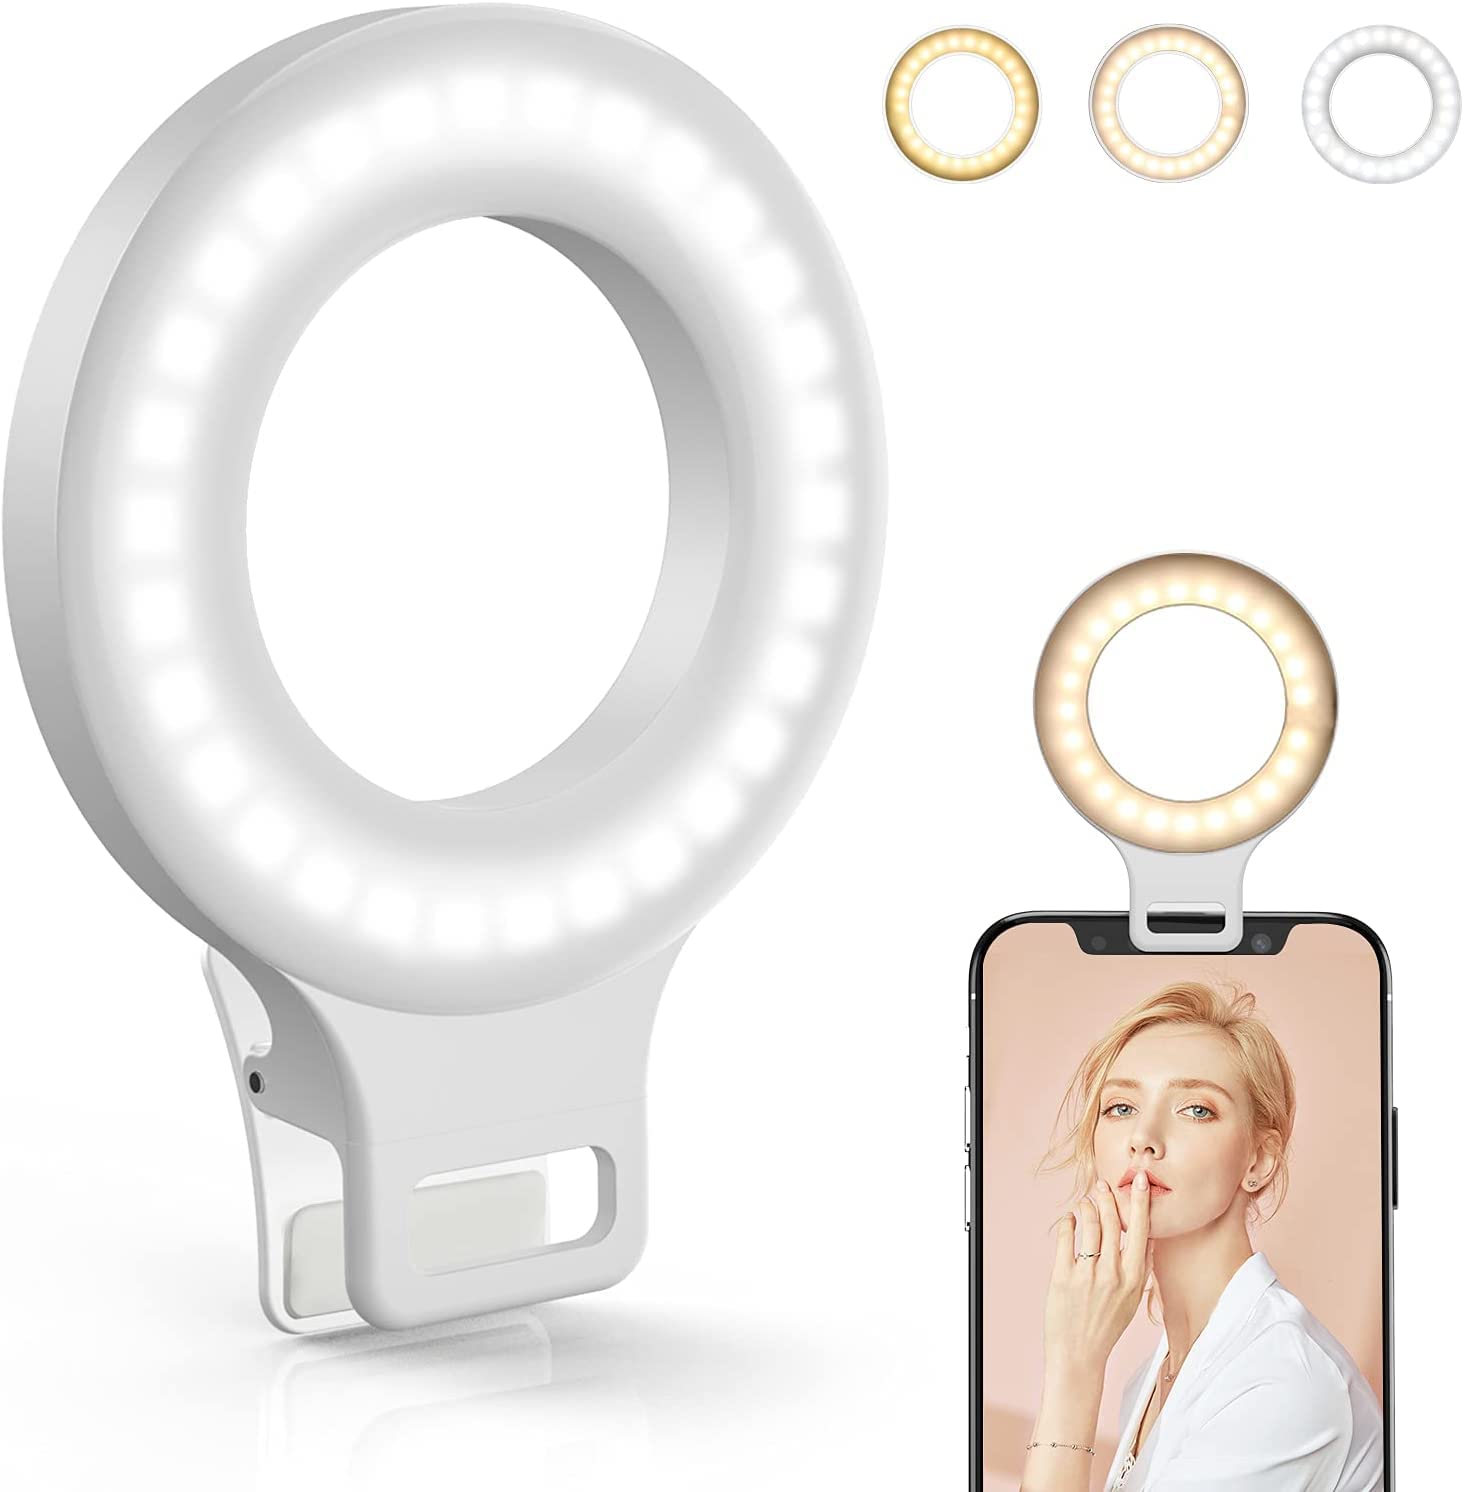 Which Ring Light To Buy Amazon - Here Are 5 Reviews